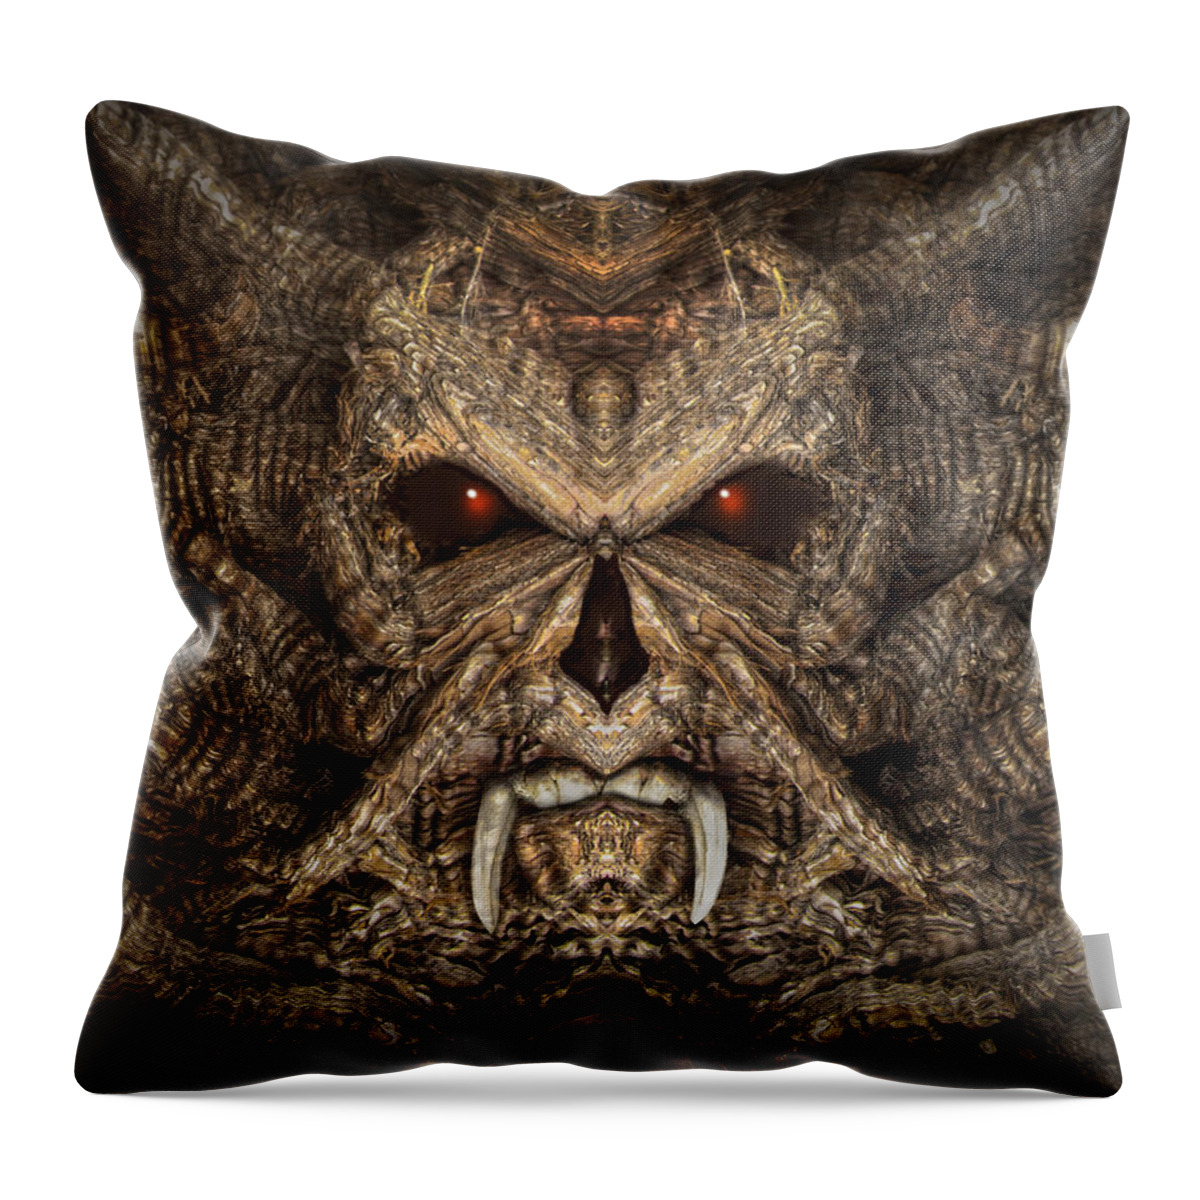 Wood Throw Pillow featuring the photograph Wood Skull by Rick Mosher